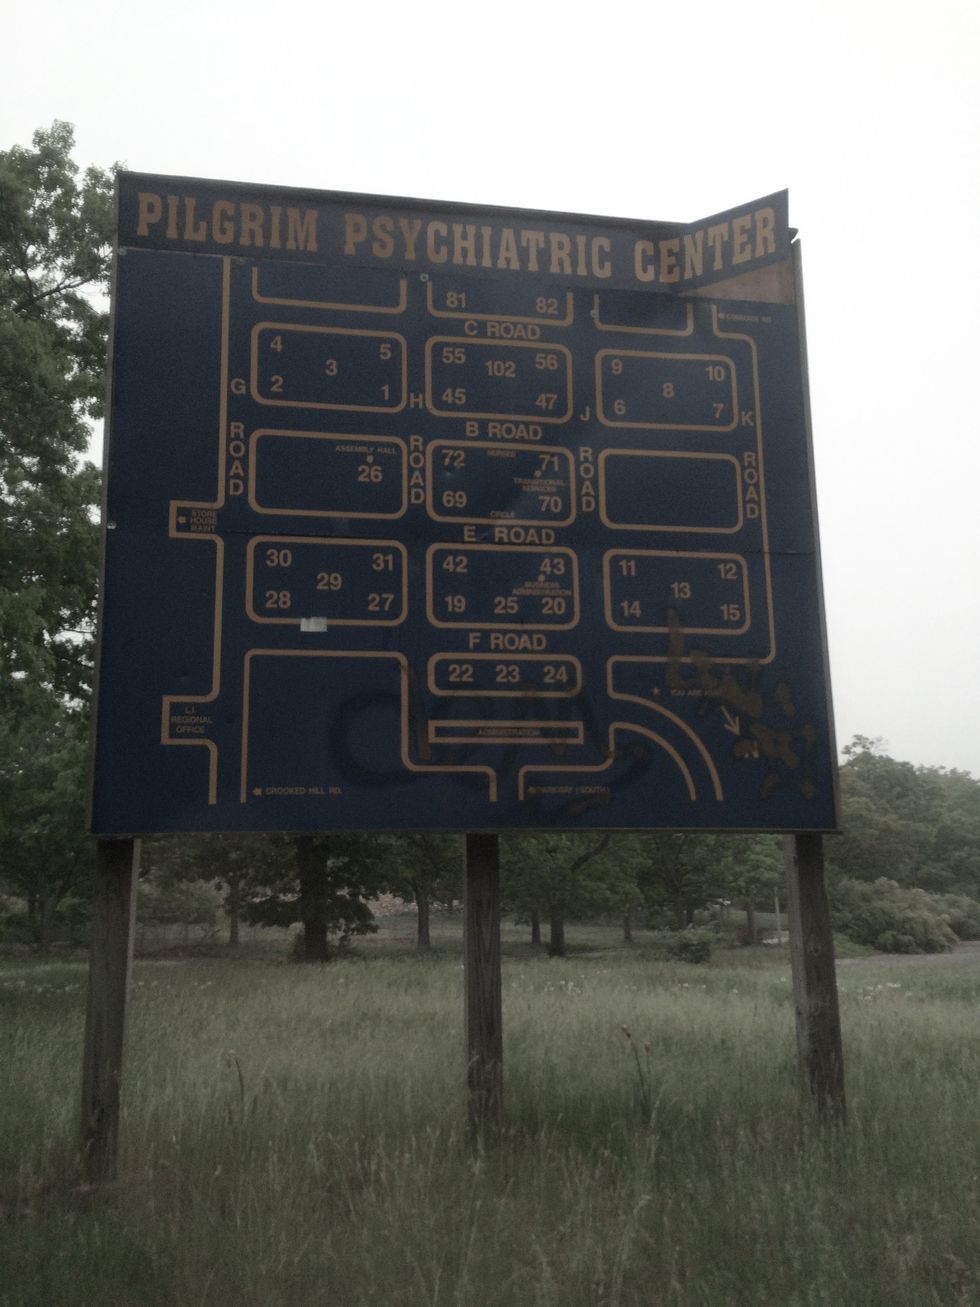 The Pilgrim State Psychiatric Center, From Hospital To 'Heartland'